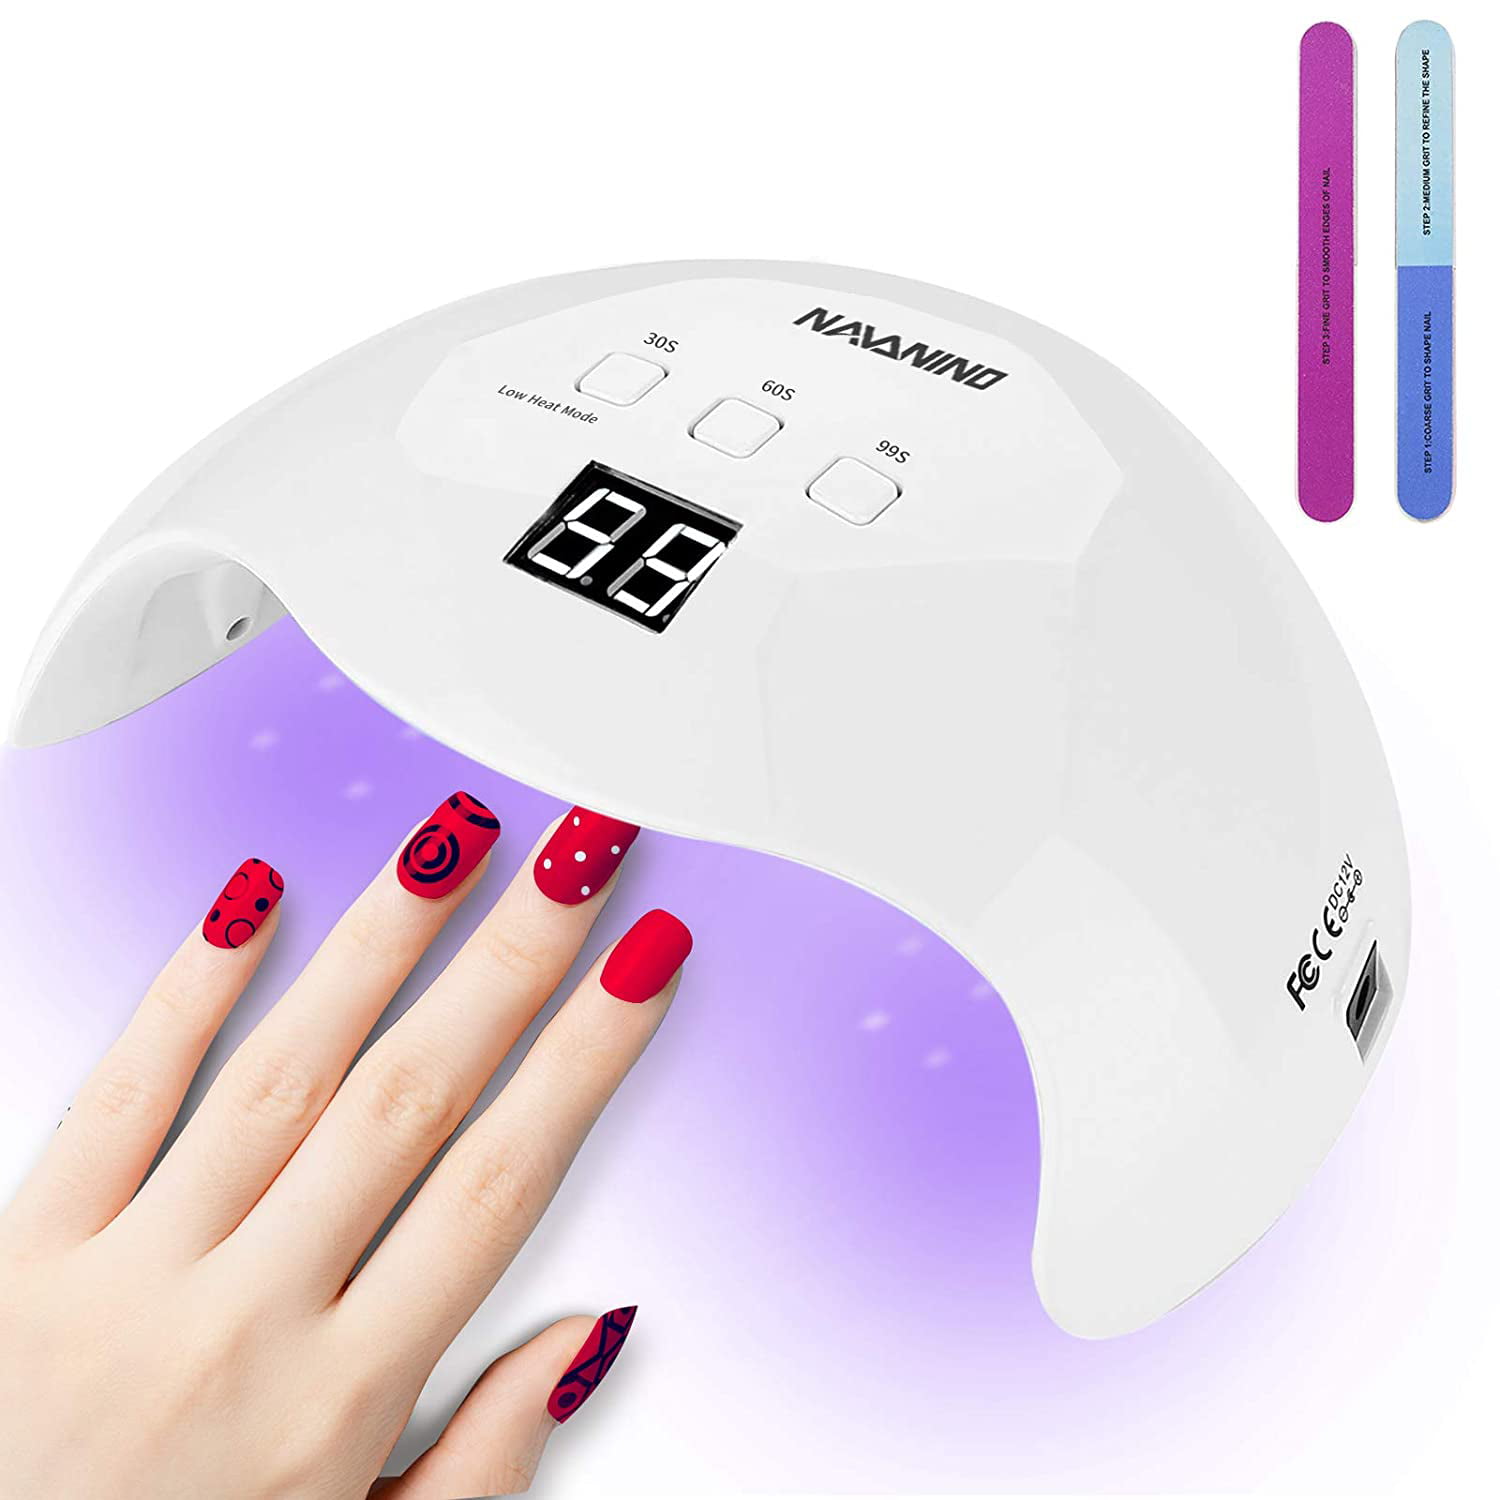 UV LED Nail Lamp, 48W Nail Dryer Gel Nail Light for Nail Polish, Light  Curing in 3 modes for time, Low heat mode 99s and LCD Display, For  Manicure/Pedicure Nail Art at